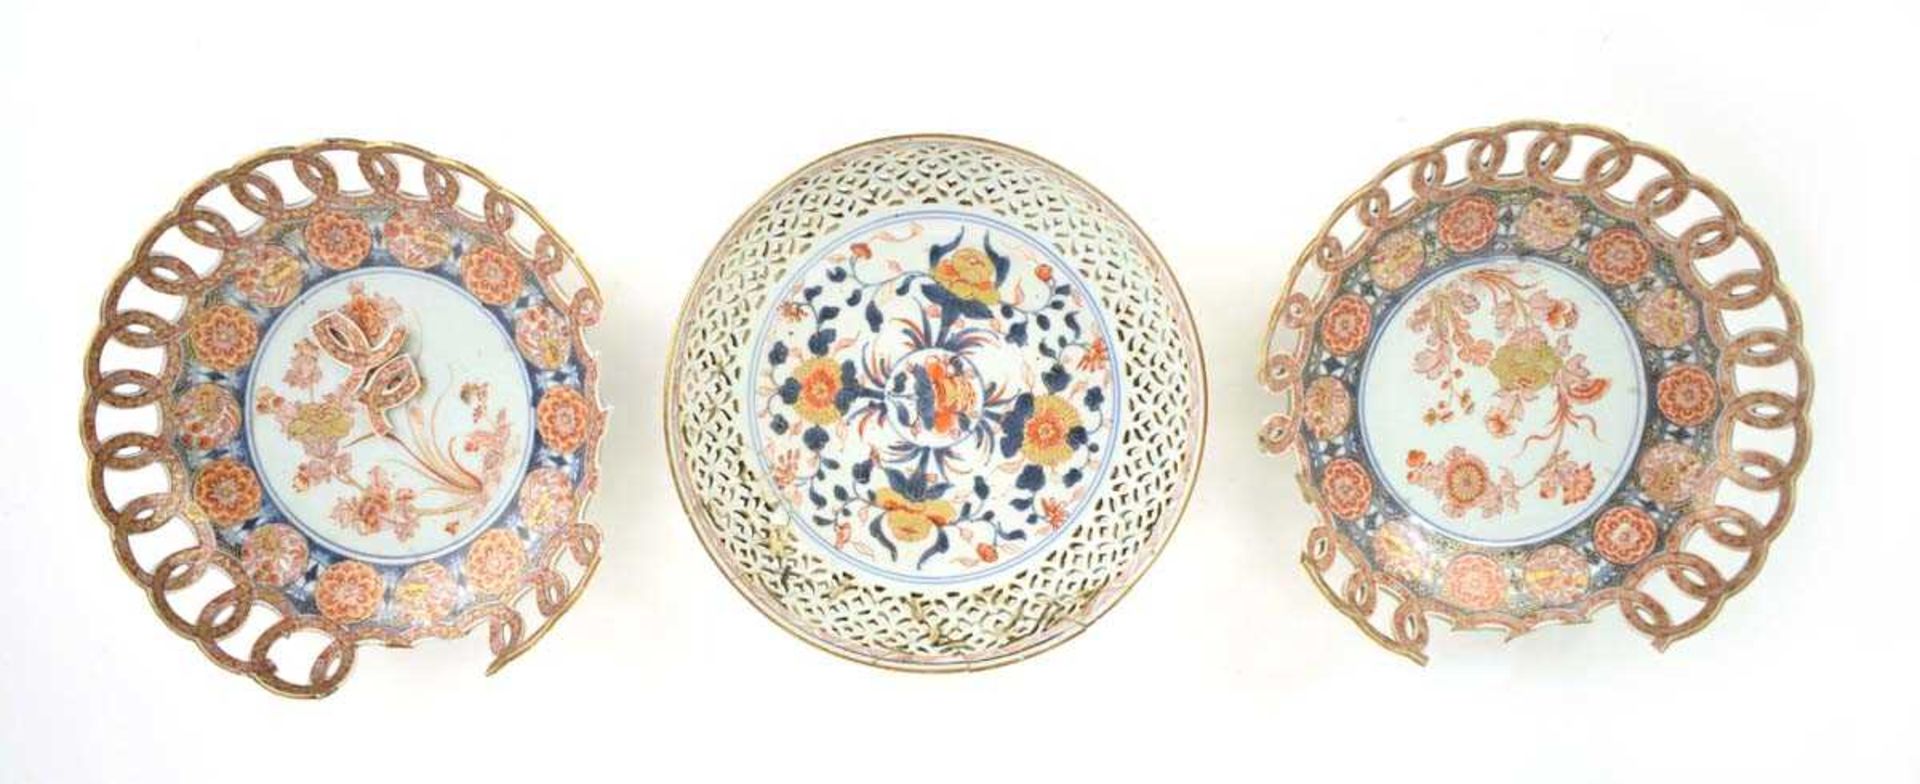 A Chinese dish with pierced border, centrally decorated with stylised flowers in the Imari